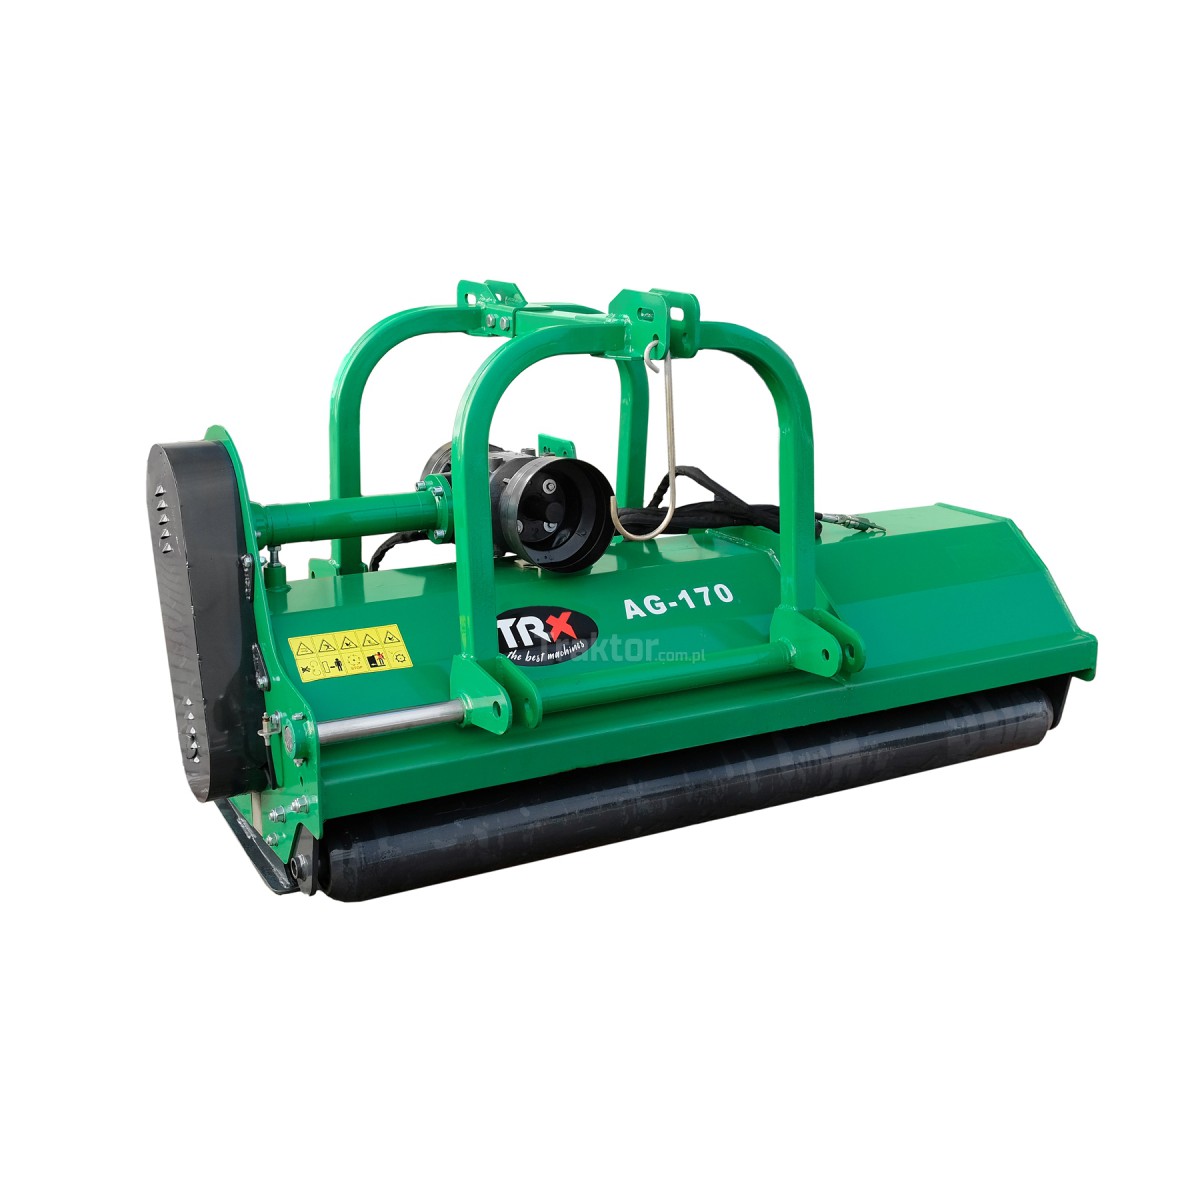 AG 140 TRX double-sided flail mower with hydraulic shift